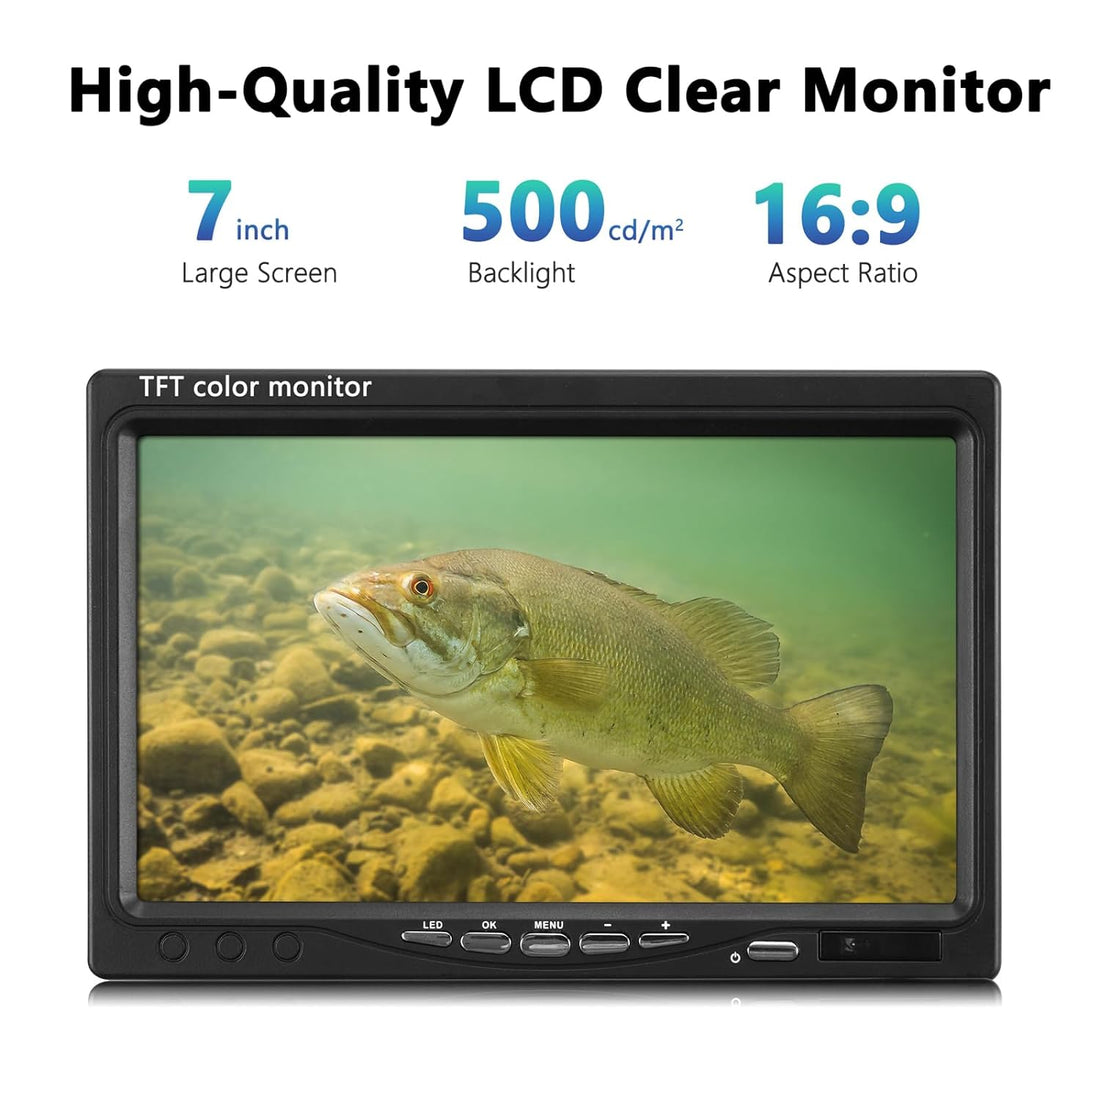 MOQCQGR Underwater Fishing Camera, Portable Video Fish Finder wiht 7 inch HD LCD Monitor 1200TVL Camera, 12pcs IR and 12pcs LED White Lights for Ice,Lake and Boat Fishing(15M/49FT)